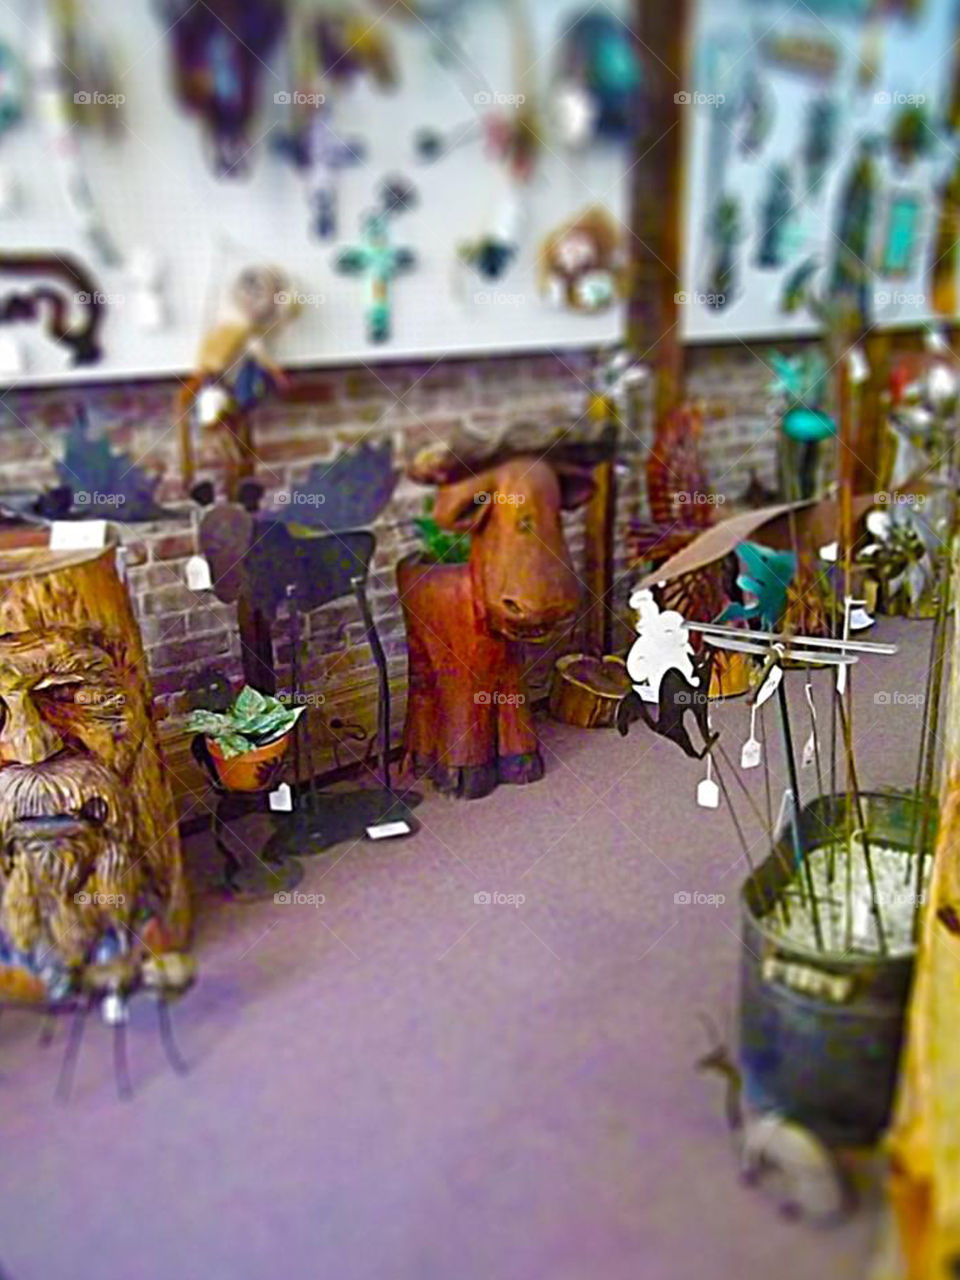 Gift Shop on Weston, Missouri. I created a tilt shift effect to make this cute little gift shop even cuter.